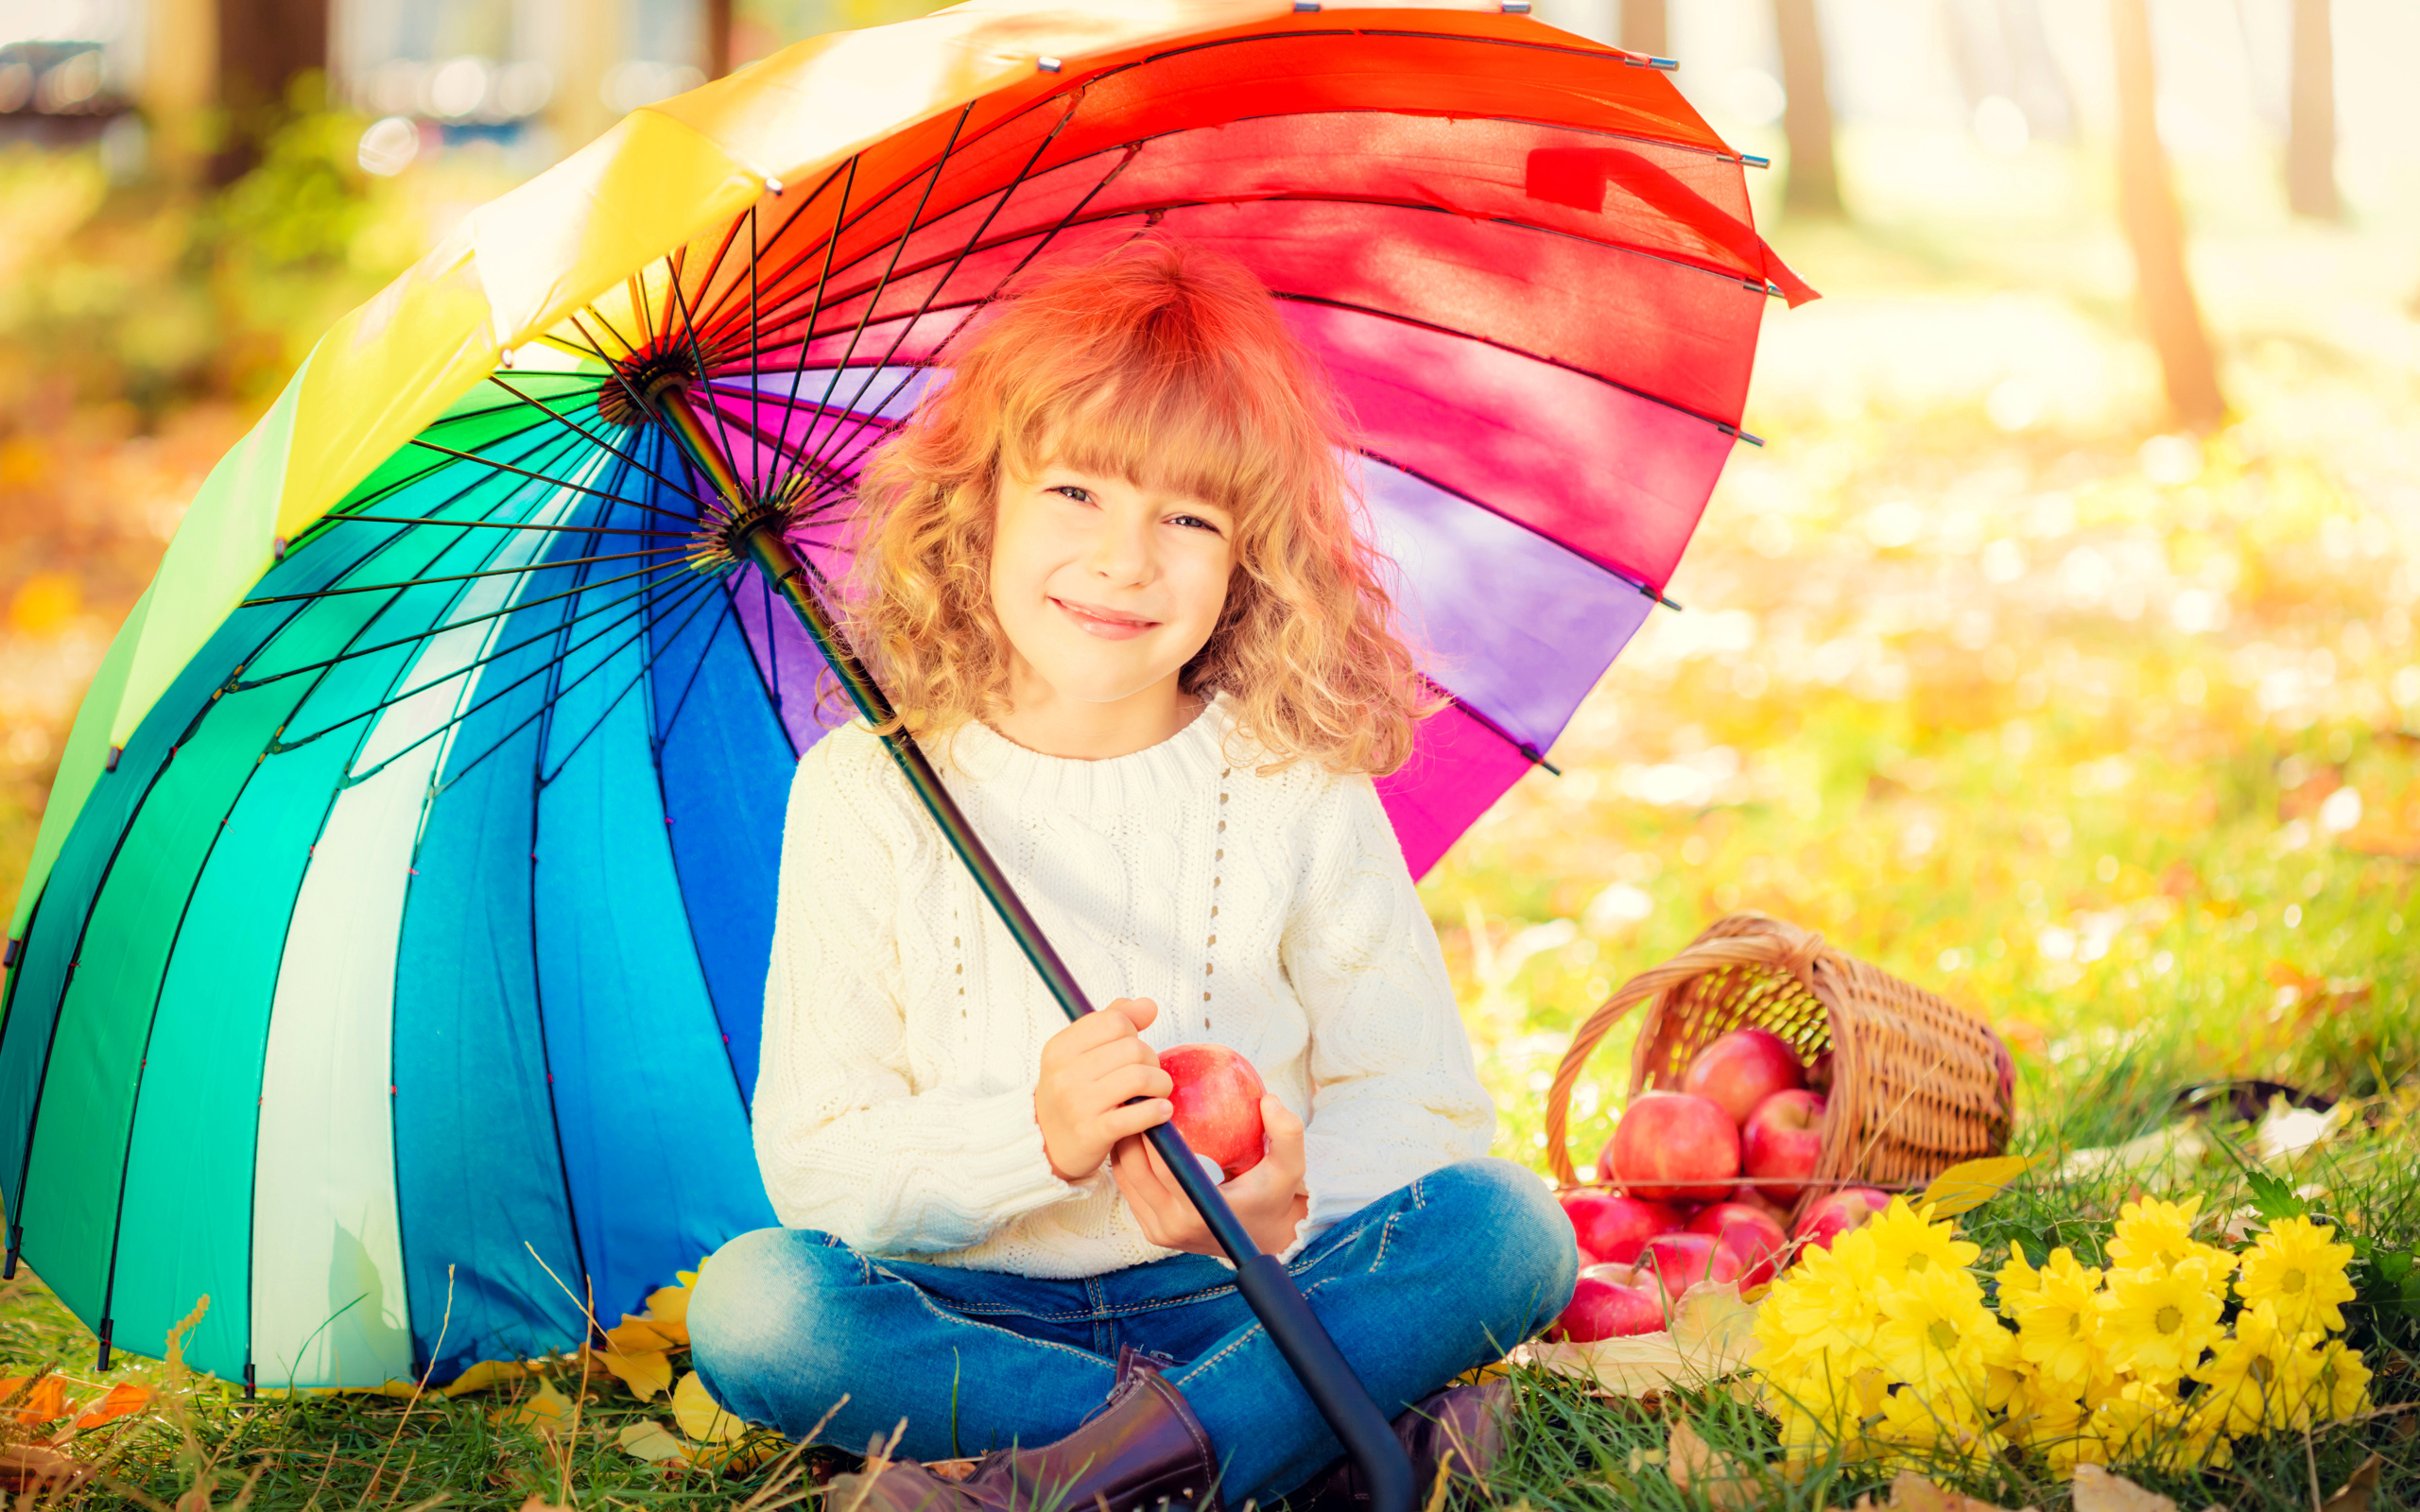 Smiling girl sitting under a colorful umbrella